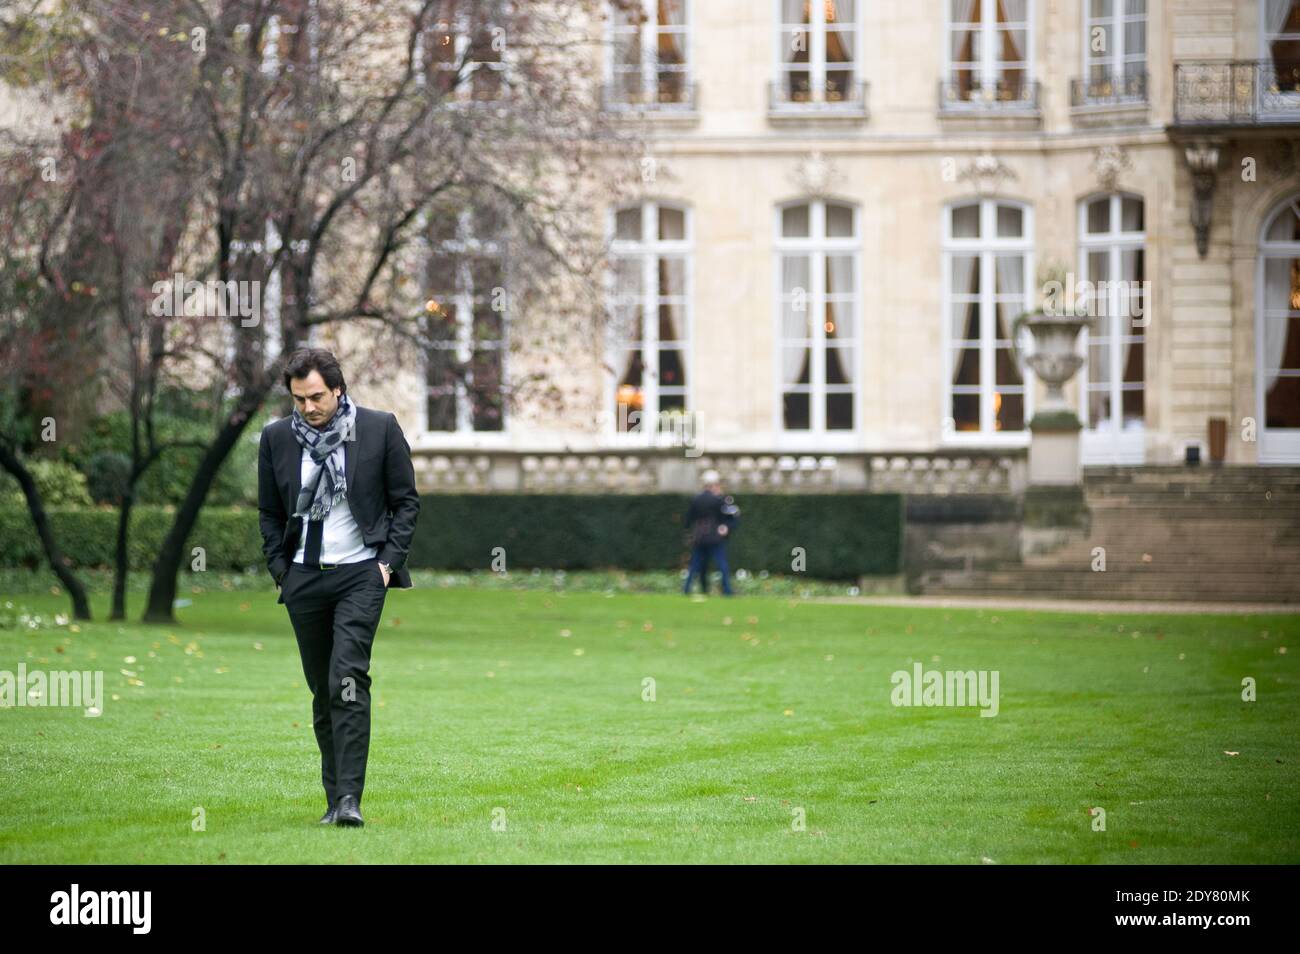 Harold Hauzy, the communication advisor to French Prime Minister Manuel Valls arrives for the planting of the tree called 'of the Prime Minister' - as is the republican tradition - in the gardens of his headquarters Hotel de Matignon in Paris, France on December 16, 2014. The tree, chosen by the Prime Minister, is an oak of the species 'Quercus robur fastigiata' and is located on the front lawn. The tradition of planting a tree at the PM's headquarters was introduced by the late Prime Minister Raymond Barre in 1978. Photo Pool by Nicolas Messyasz/ABACAPRESS.COM Stock Photo